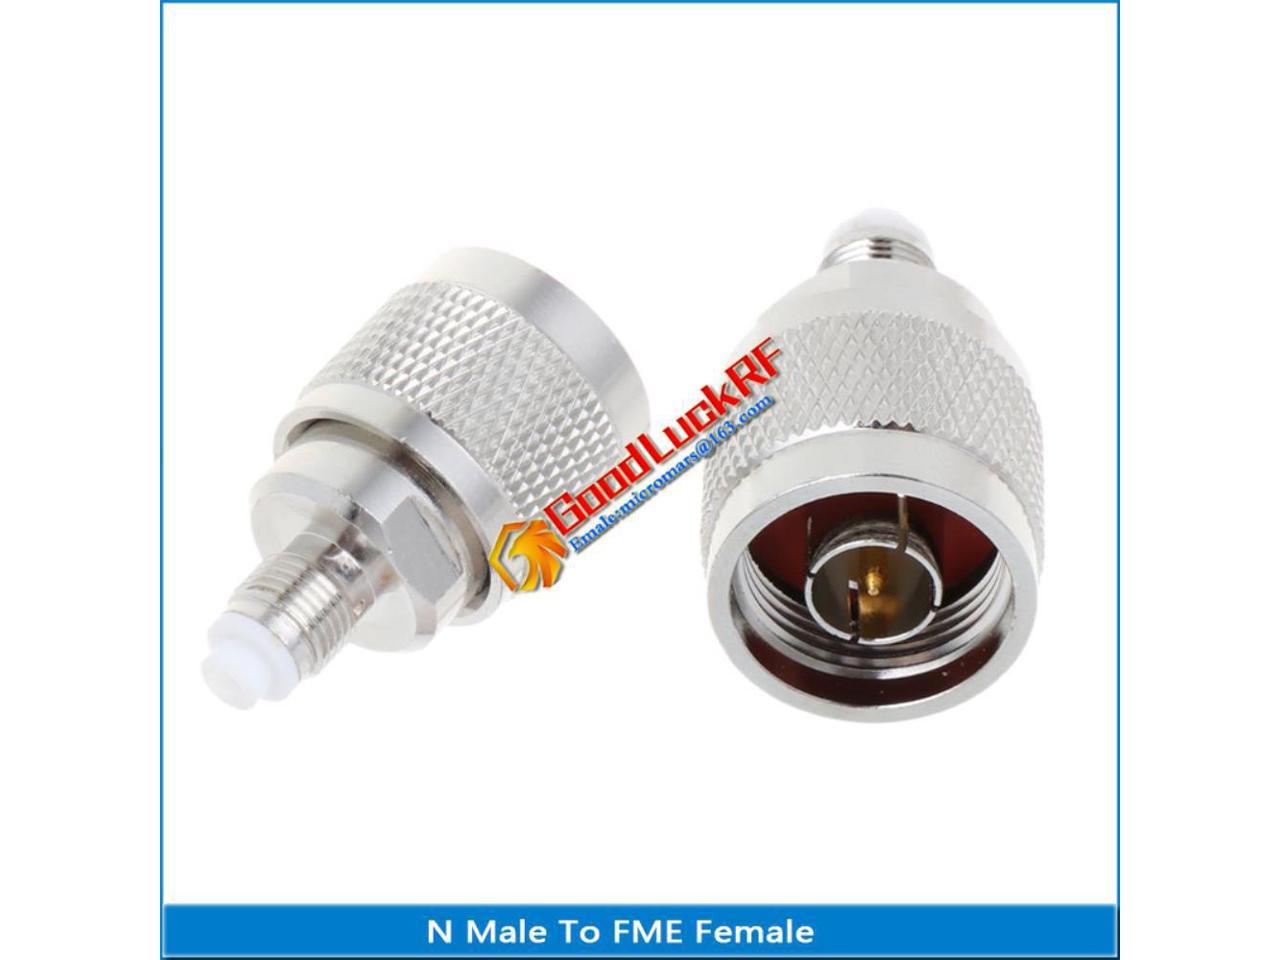 10pcs FME Male Plug to SMA Female Jack Straight RF Coaxial Adapter Connector for sale online 